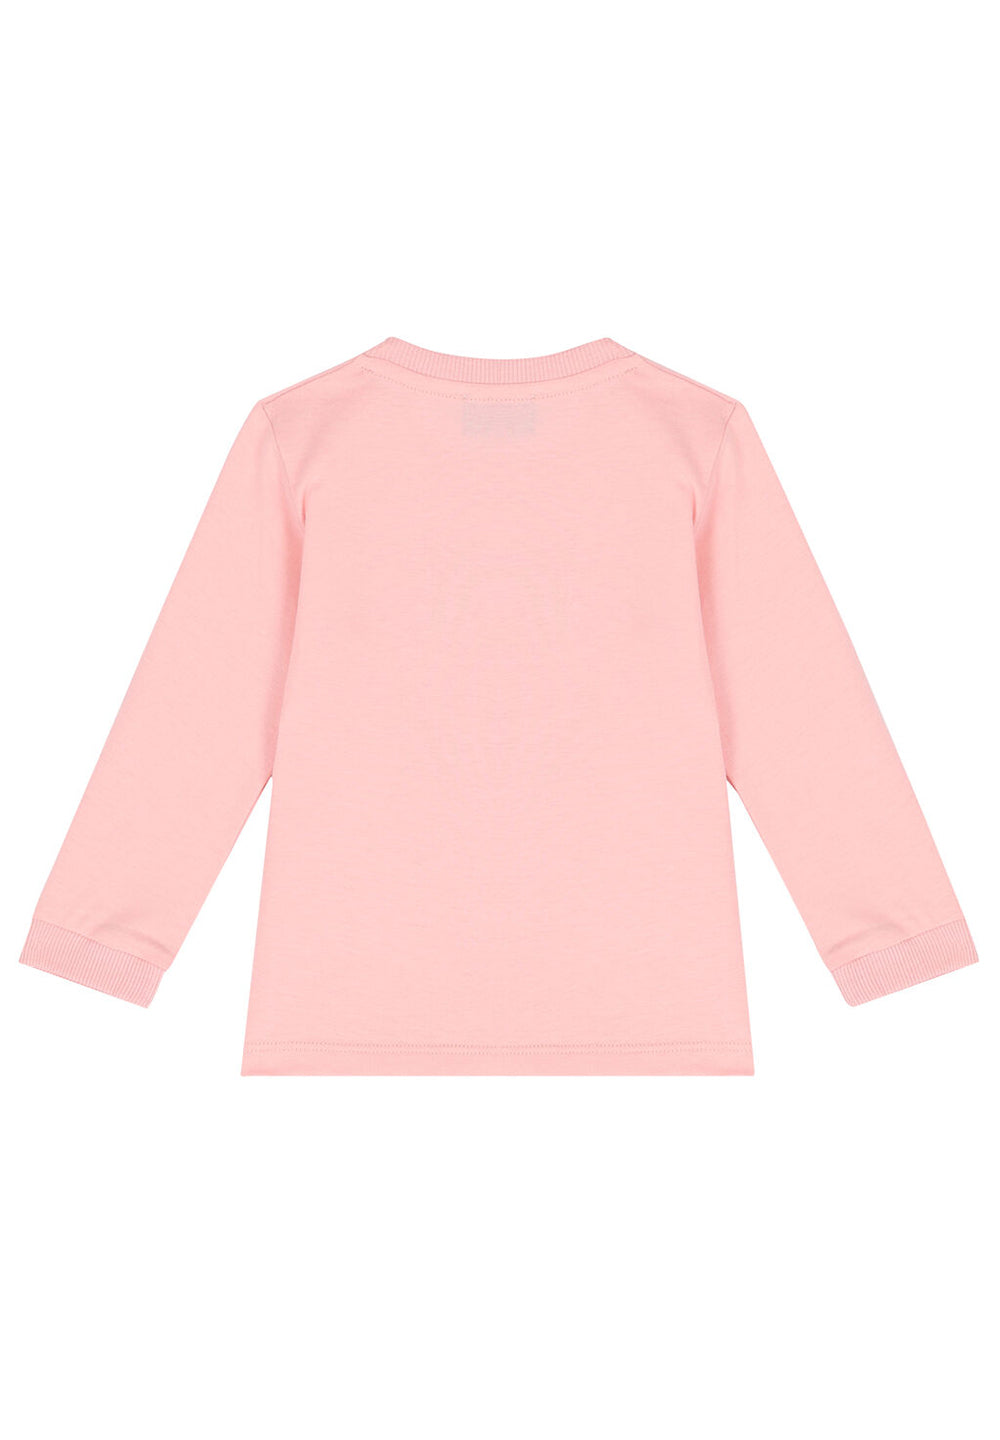 Pink t-shirt for girls